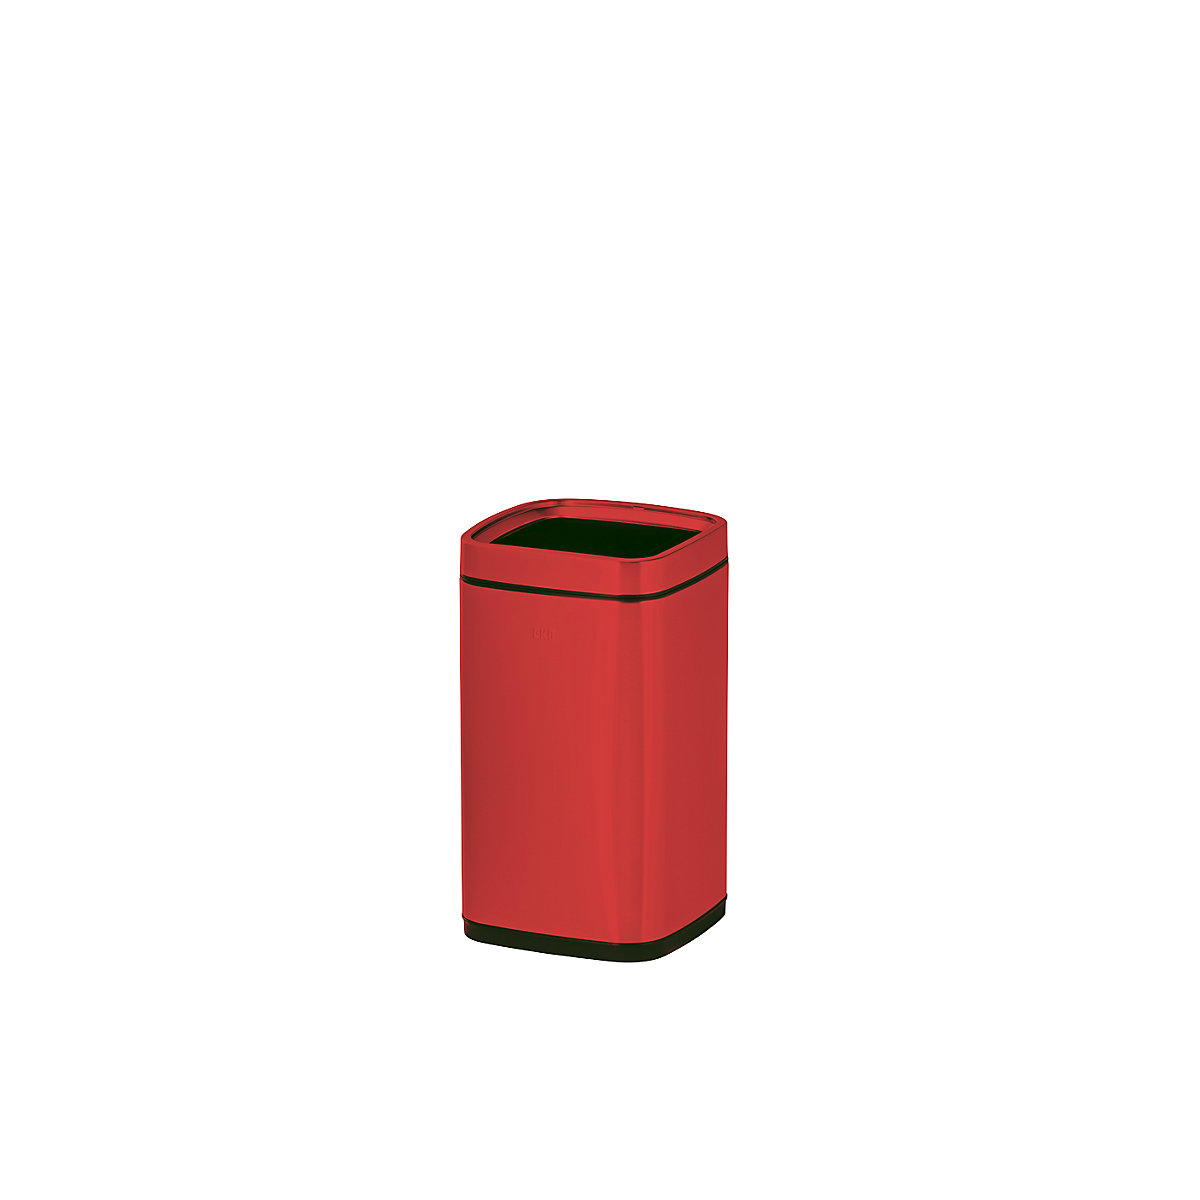 Waste paper bin with inner container – EKO, capacity 12 l, red-2